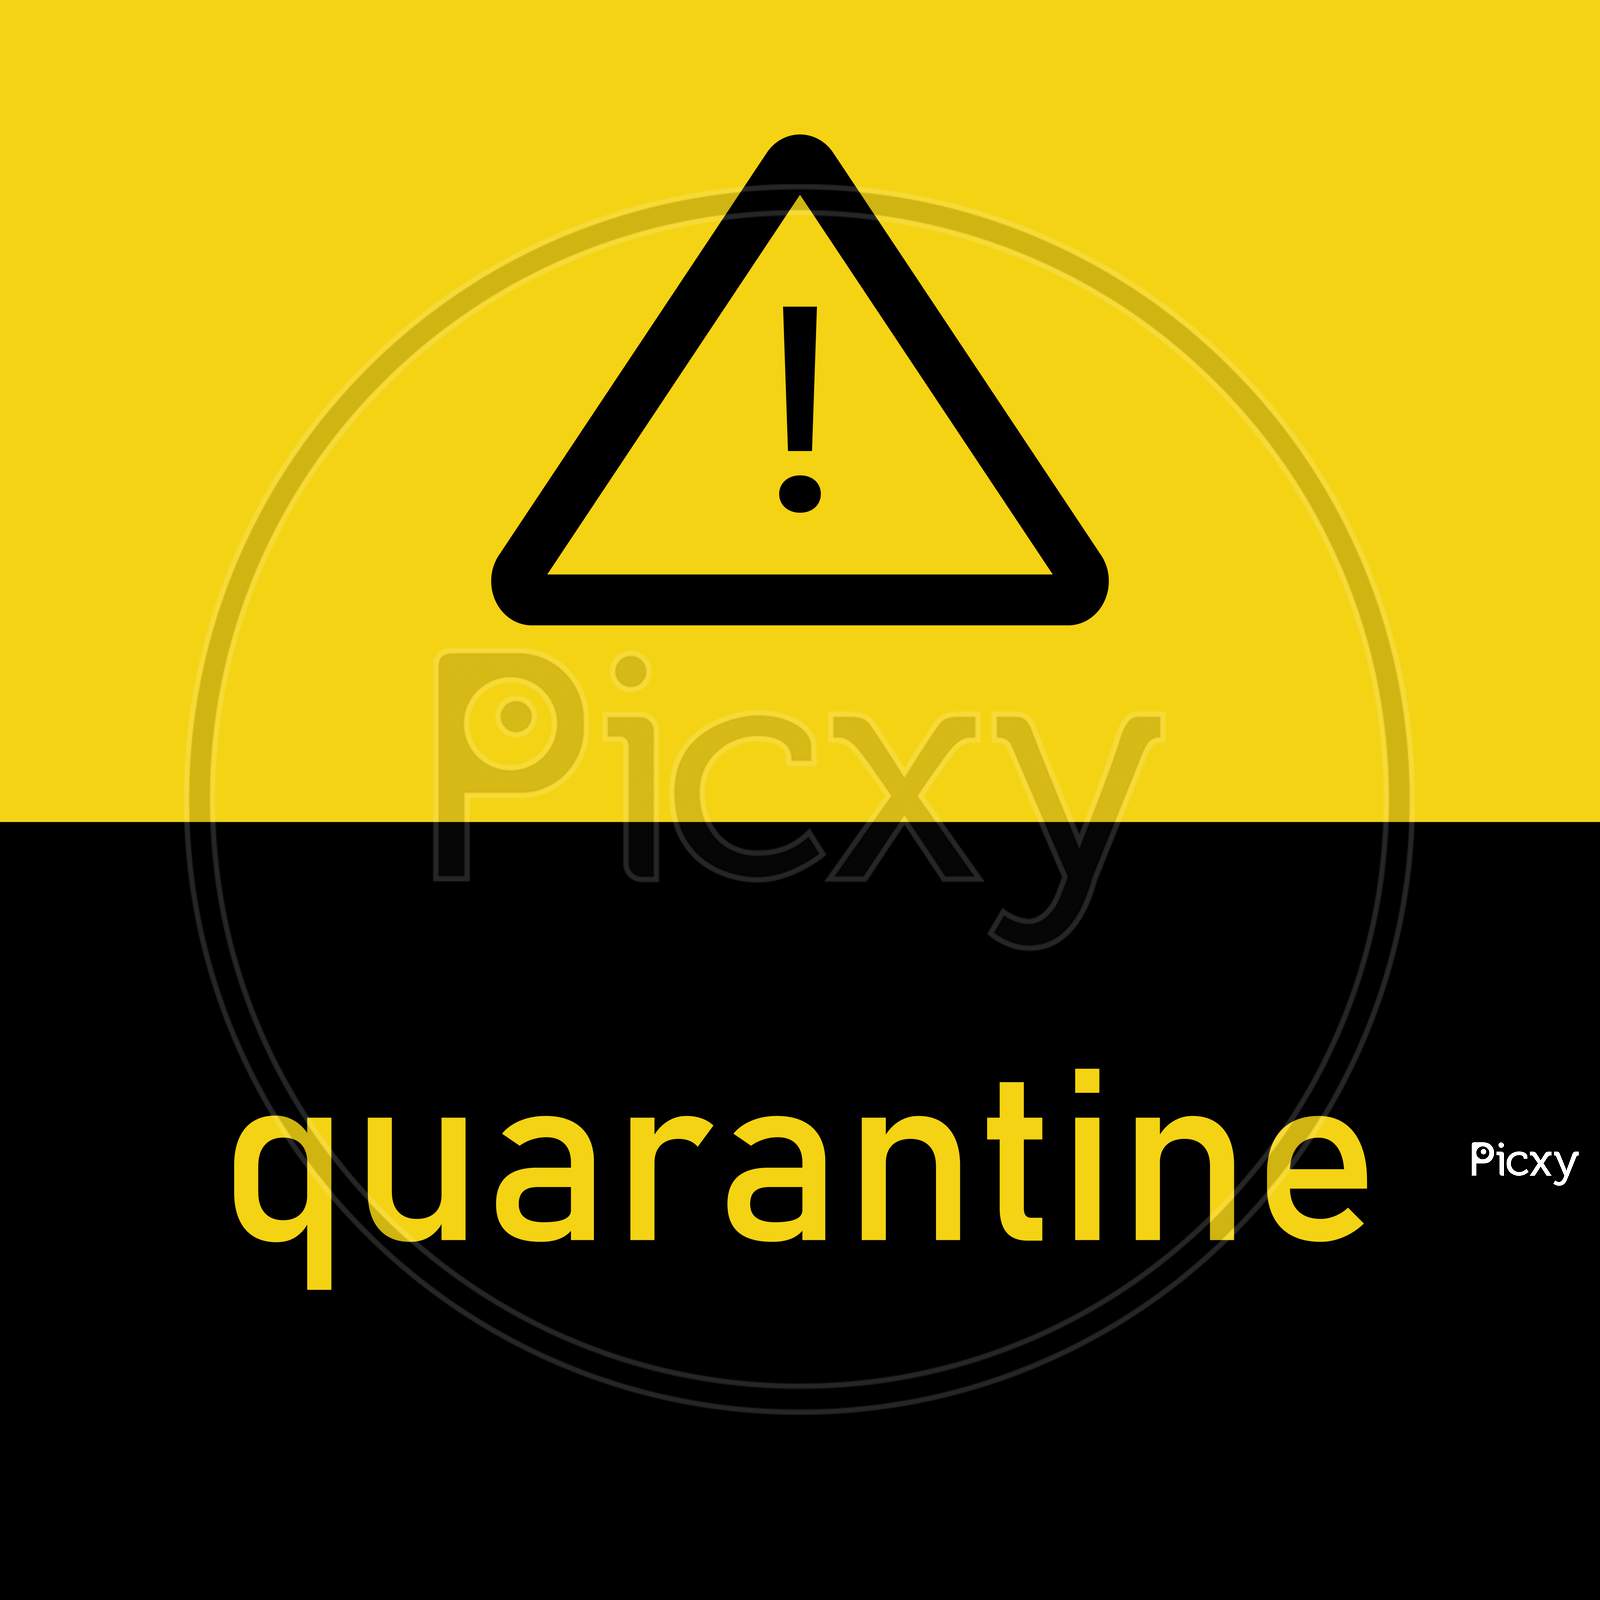 Hazard Warning Quarantine Poster. Vector Template For Posters, Banners, Advertising.